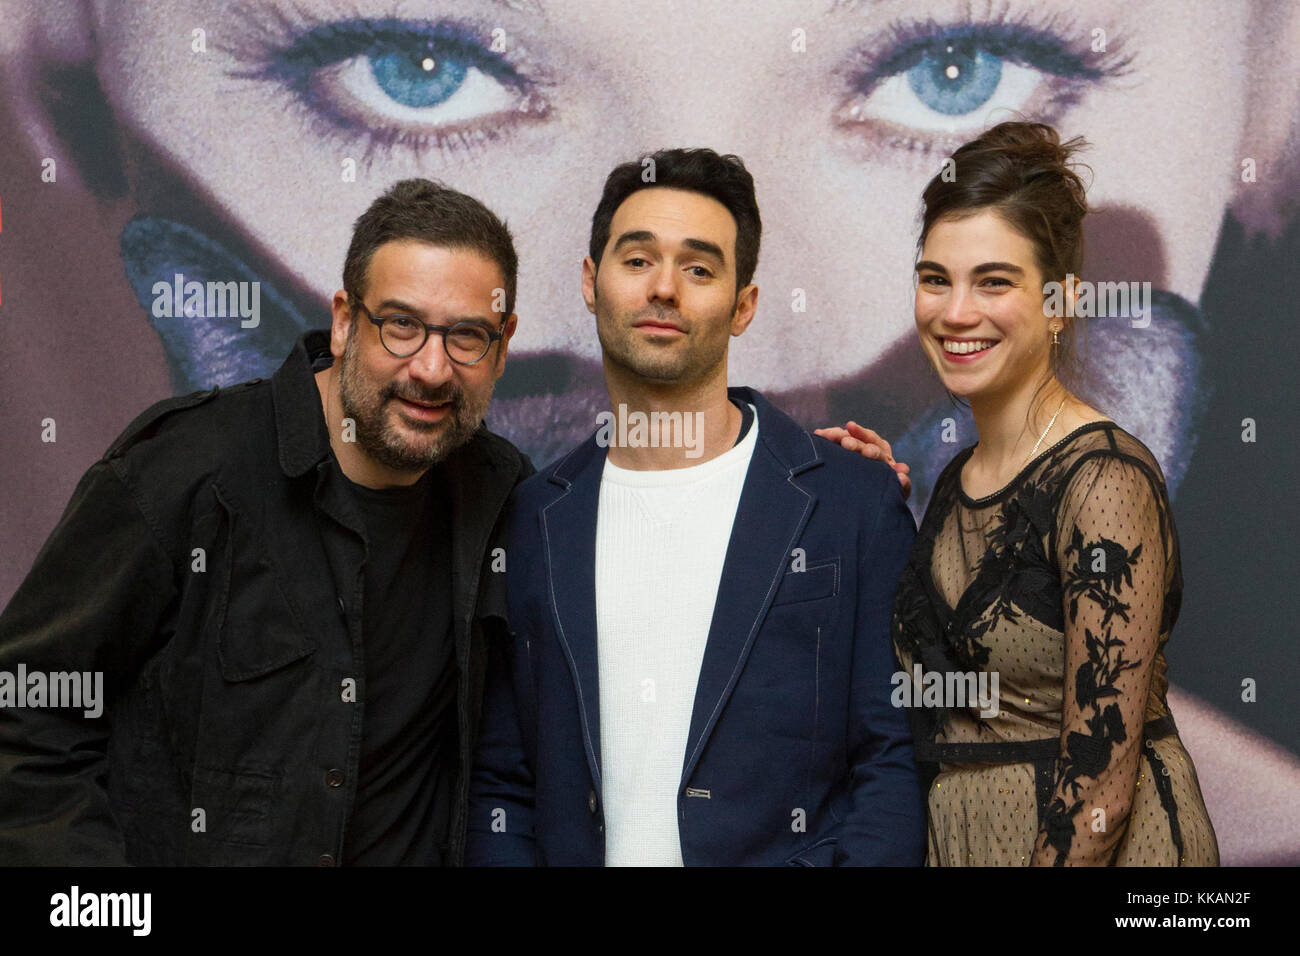 Torino, Italy. 30th Nov, 2017. The cast of film 'Don't Forget Me' attends a photocall at Torino Film Festival. From left to right: film director Ram Nehari and actors Nitai Gvirtz and Moon Shavit (Nitzan Layla Shavit). Credit: Marco Destefanis/Alamy Live News Stock Photo